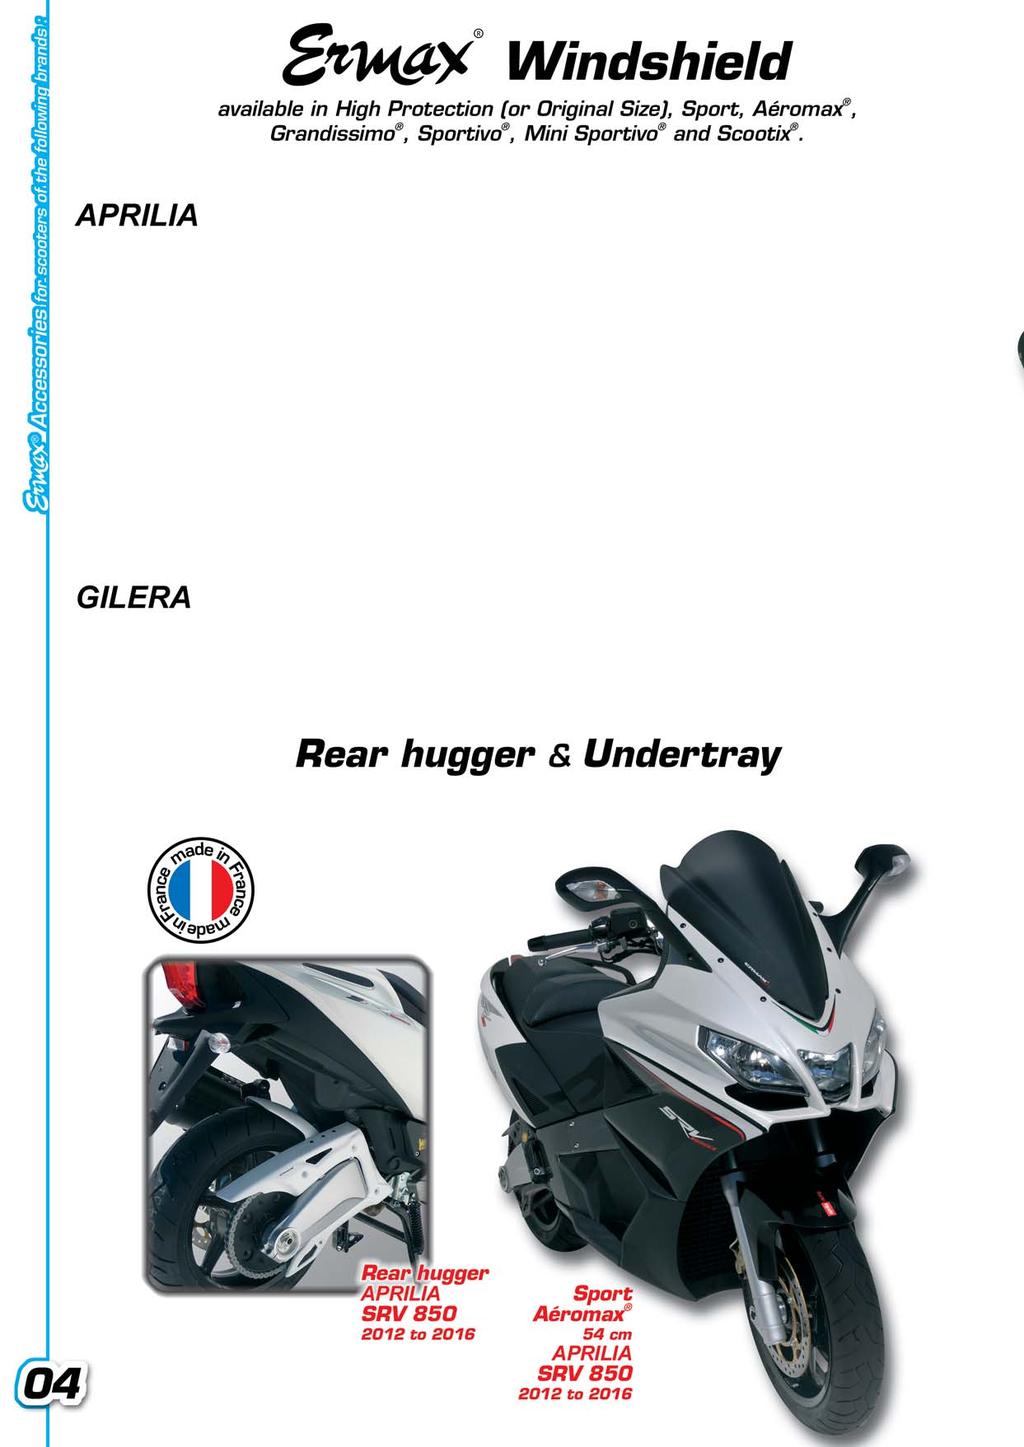 The use of the APRILIA, GILERA brands andor photos representing APRILIA, GILERA scooter models is made solely for customers information to indicate our products destination as accessories for these